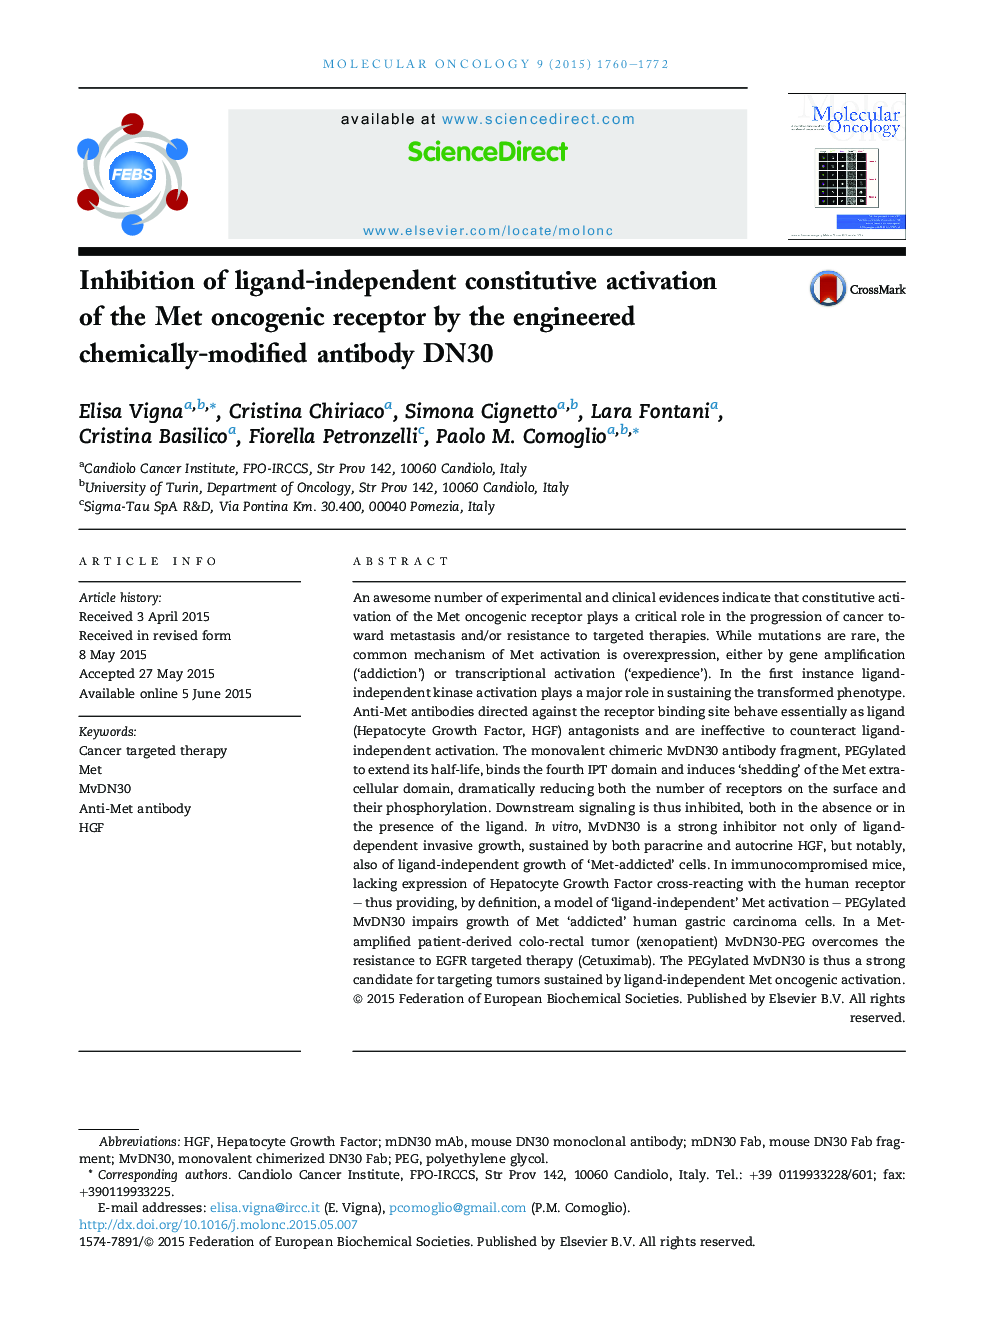 Inhibition of ligand-independent constitutive activation of the Met oncogenic receptor by the engineered chemically-modified antibody DN30